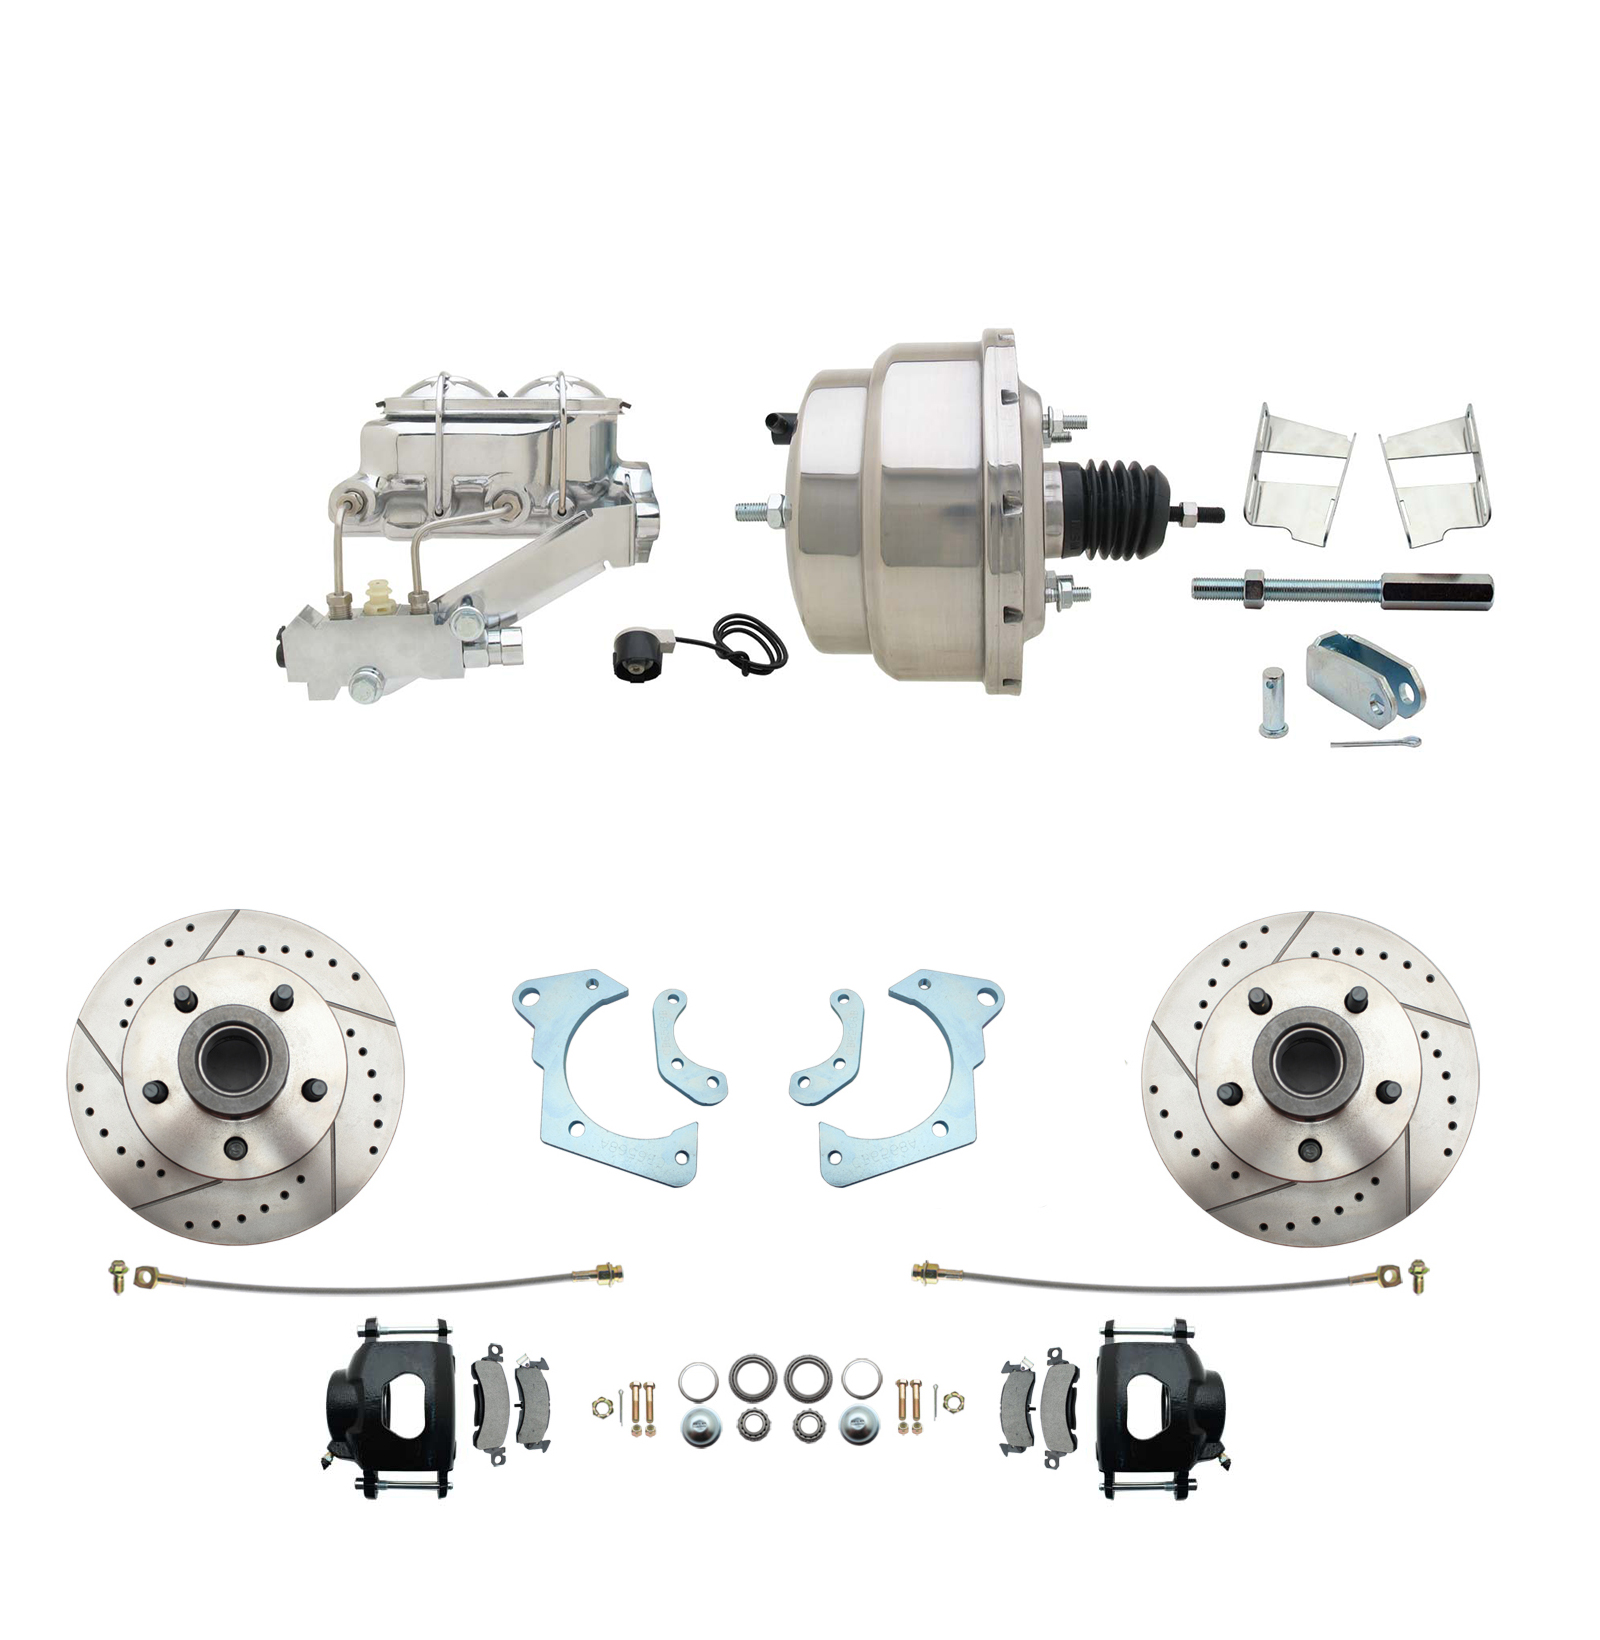 1965-1968 GM Full Size Front Disc Brake Kit Black Powder Coated Calipers Drilled/Slotted Rotors (Impala, Bel Air, Biscayne) & 8 Dual Stainless Steel Booster Conversion Kit W/ Chrome Master Cylinder Left Mount Disc/ Drum Propo